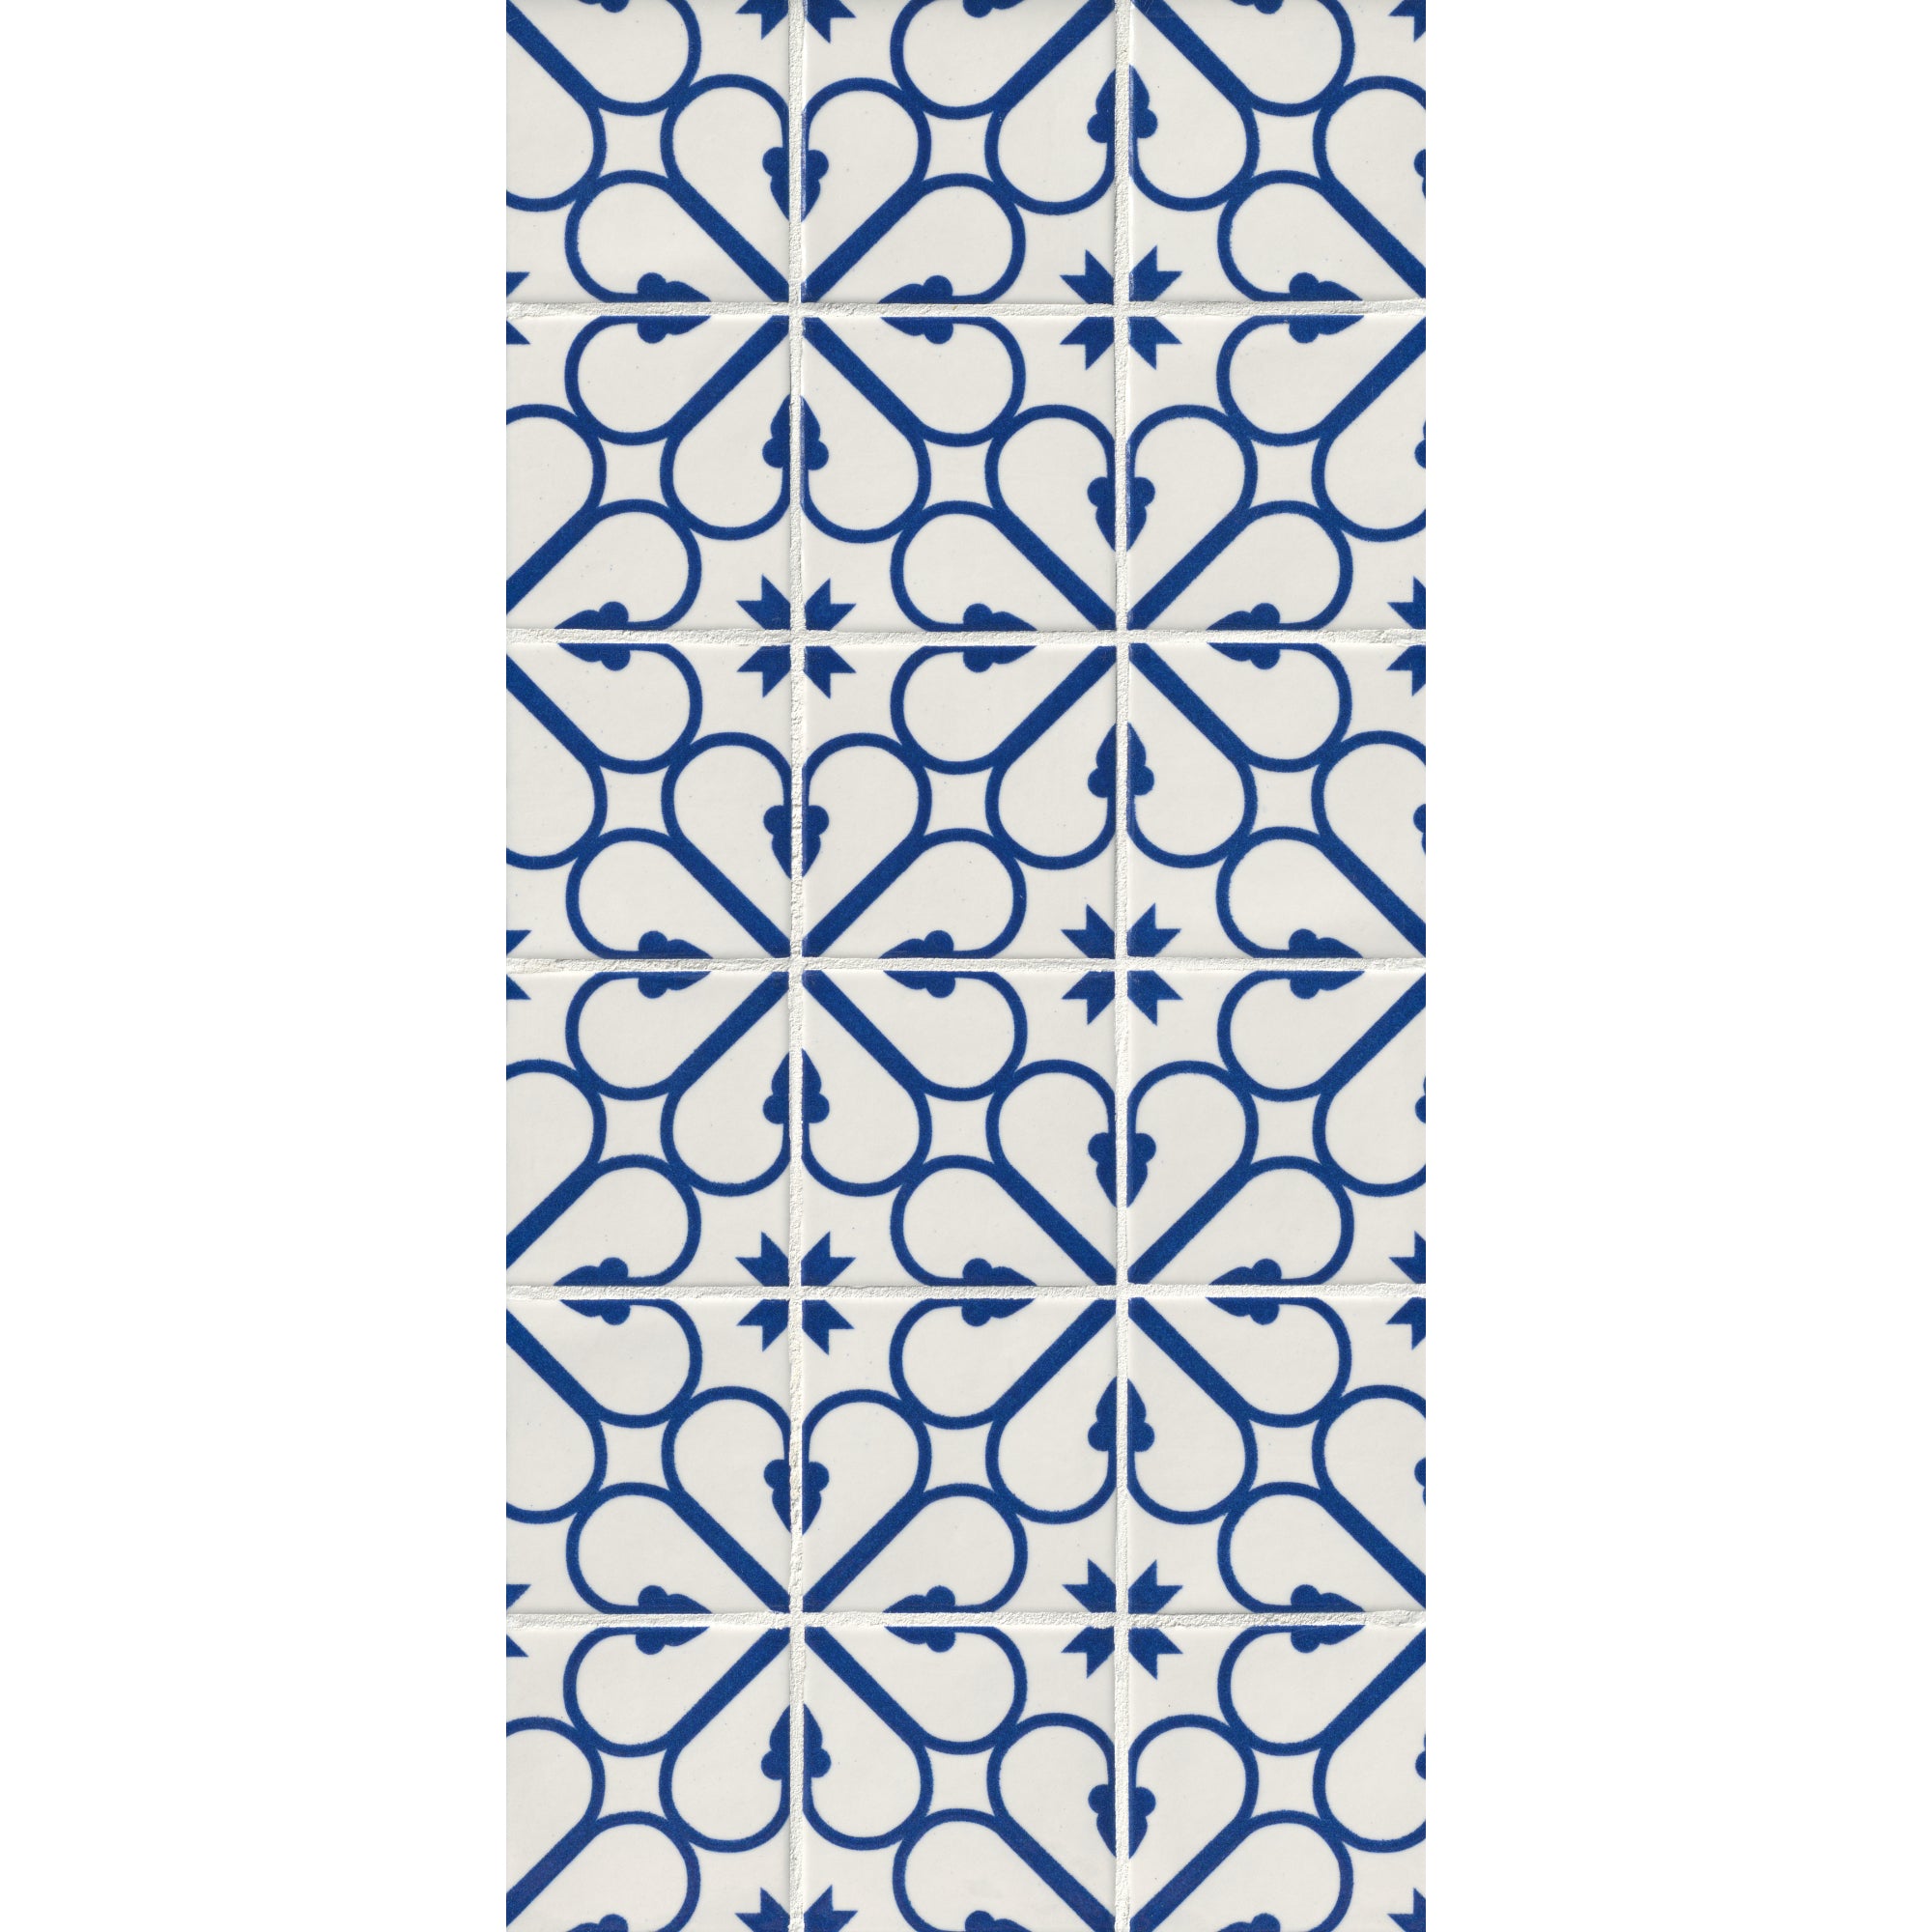 Ancient Greek Heart Blue and White Handmade Porcelain 4x4 Wall Tile Glossy for Kitchen backsplash, Bathroom Shower, Accent Wall, Countertop, Fireplace, Made in Italy